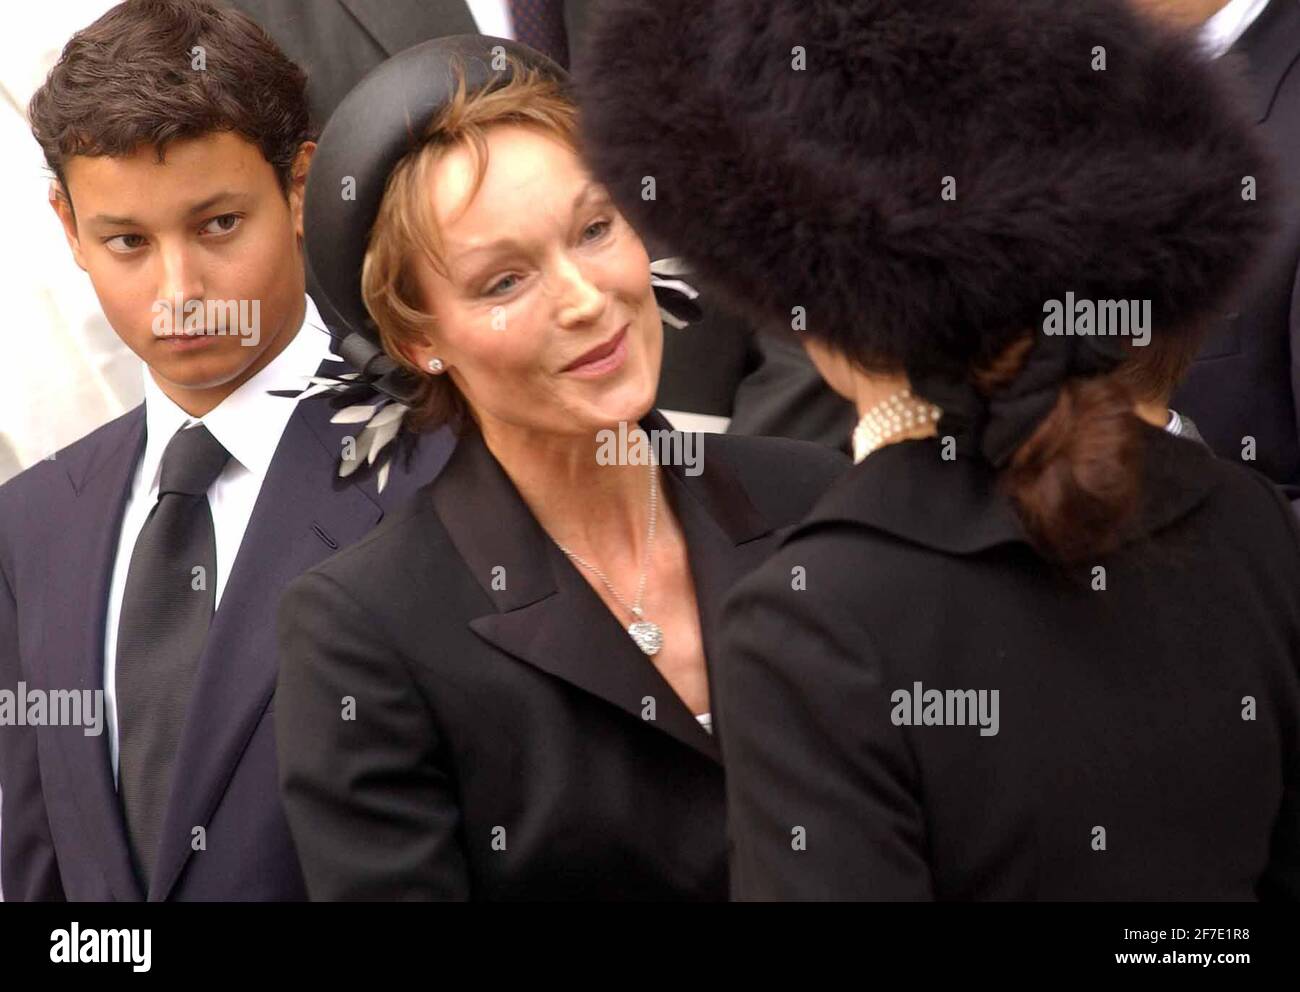 LADY VICTORIA GETTY AT THE MEMORIAL TO PAUL GETTY AT WESTMINSTER CATHEDRAL.9/9/03 PILSTON Stock Photo